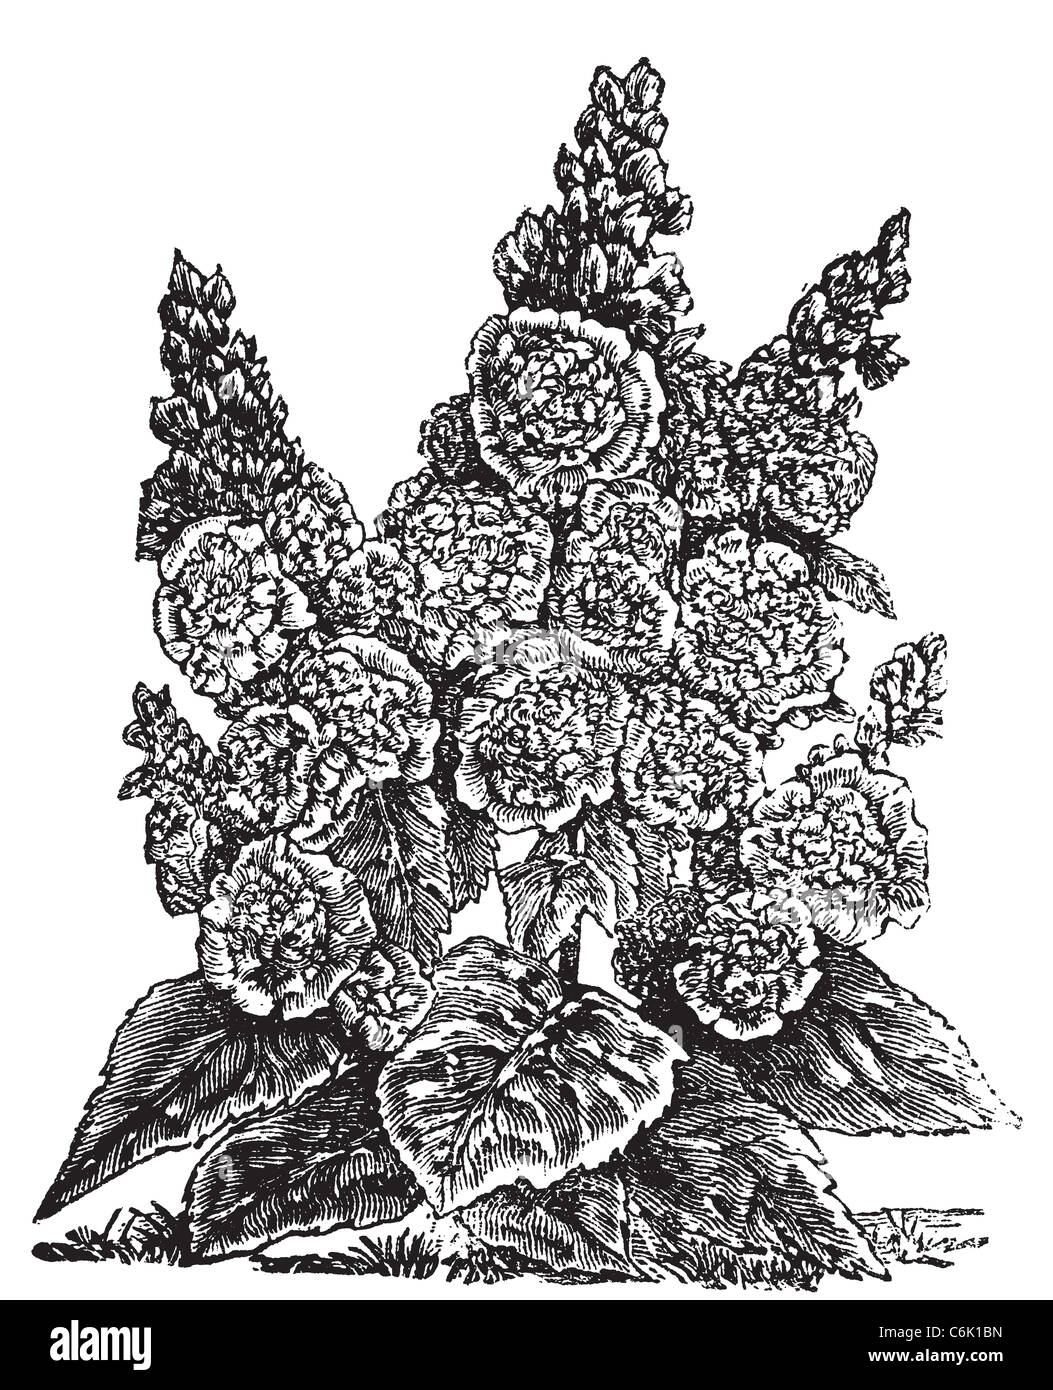 Double dwarf hollyhocks vintage engraving. Old engraved illustration, in vector, of a double dwarf hollyhock plant and flowers. Stock Photo